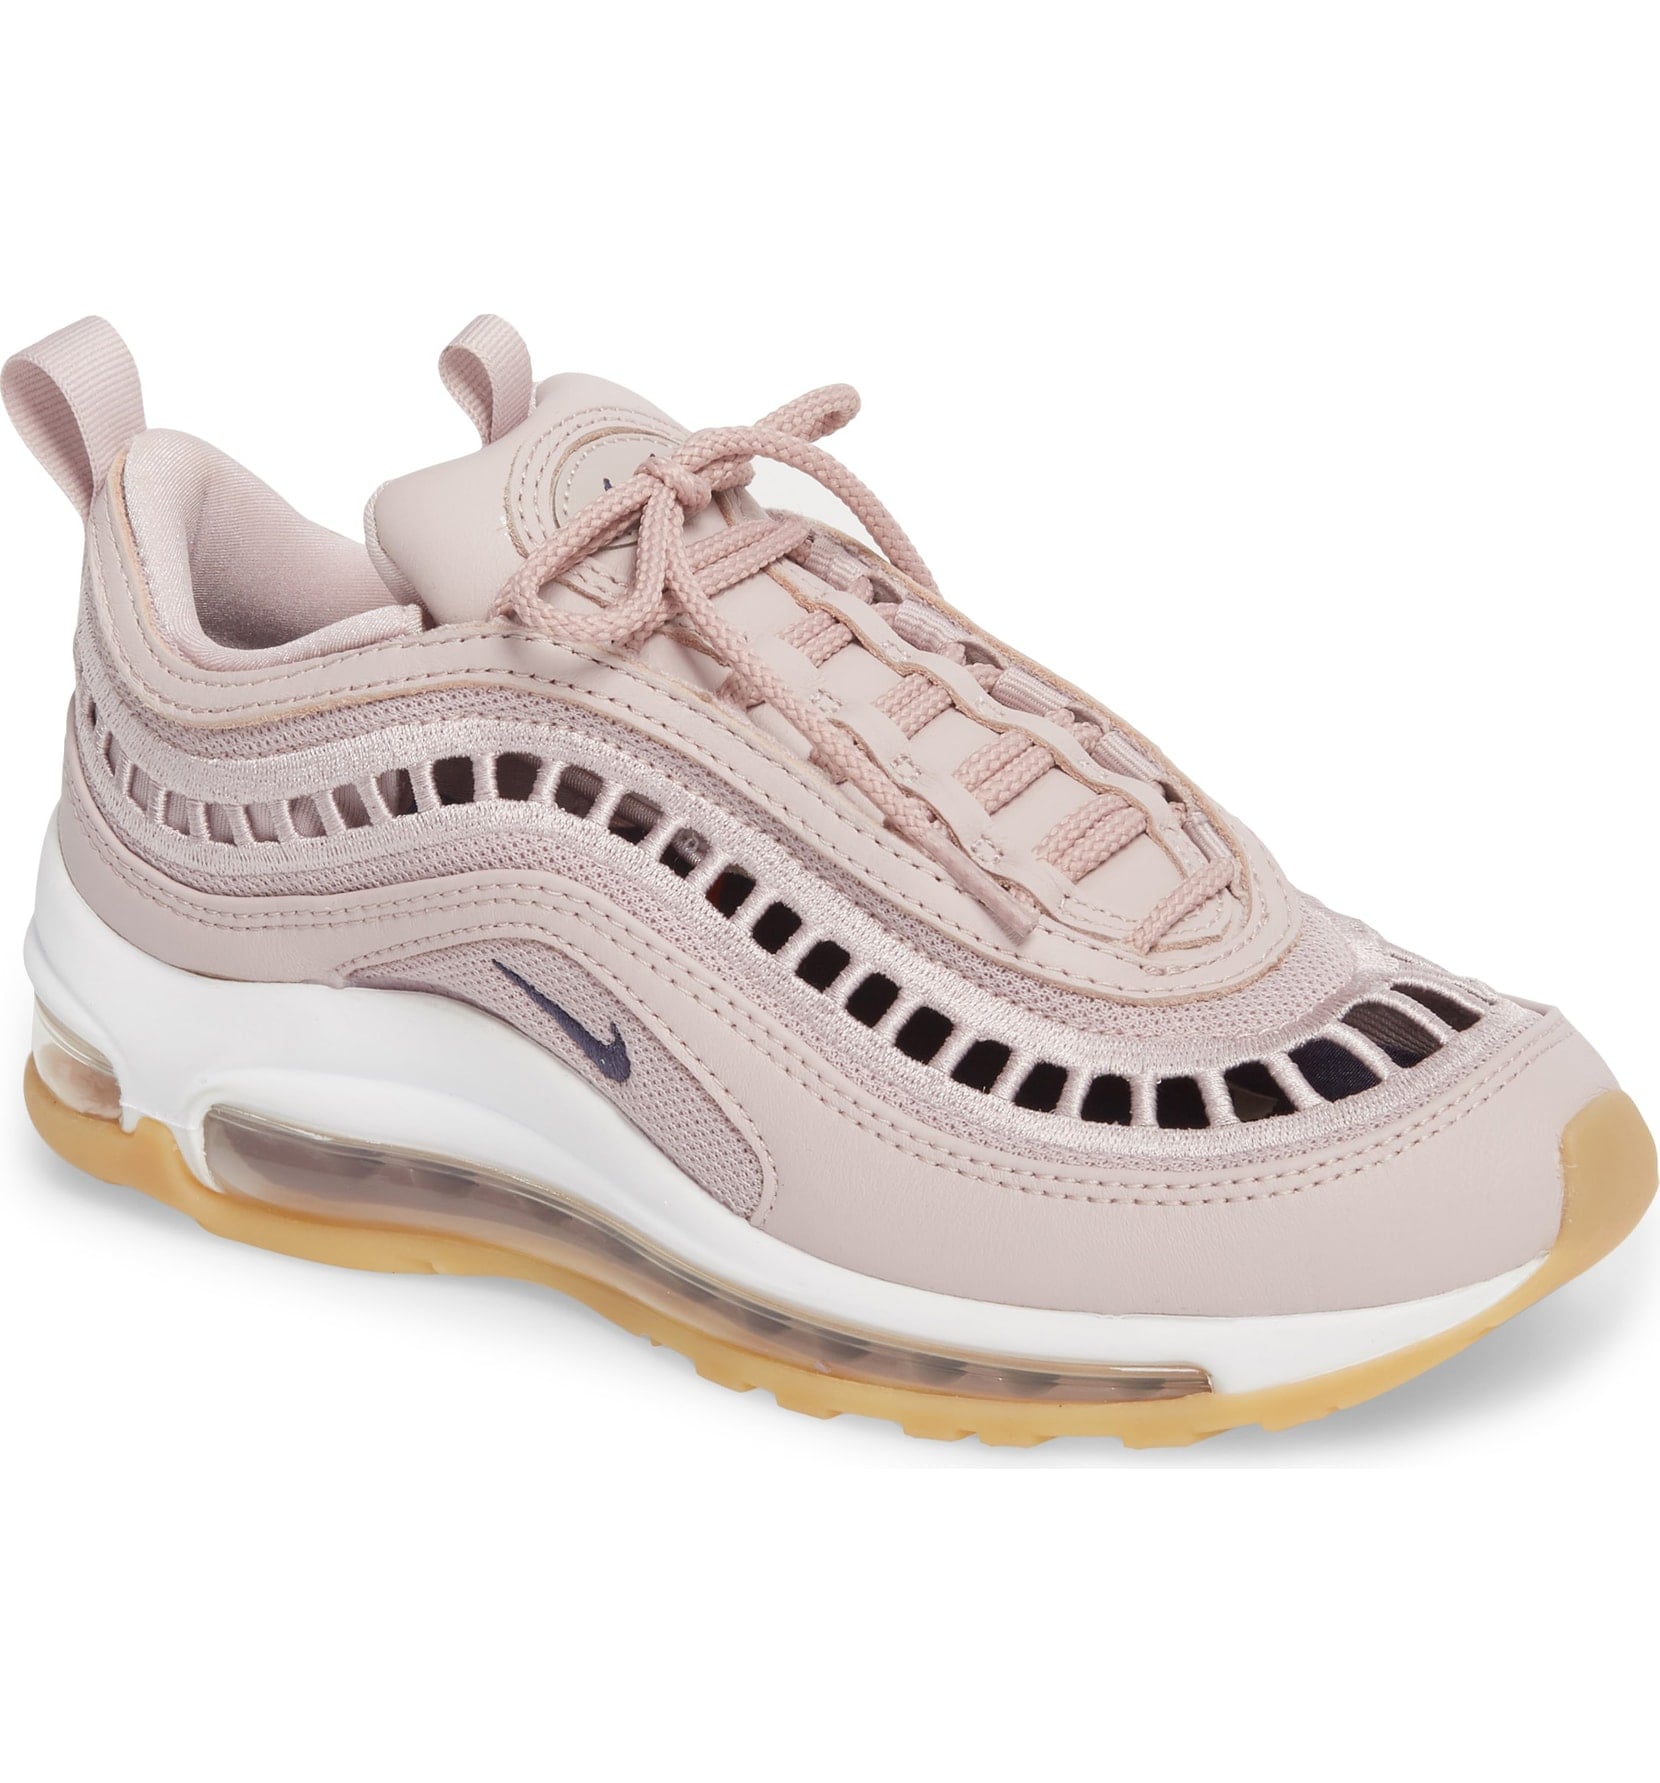 Weinig lijst zwanger Nike Air Max 97 Ultra '17 SI Sneakers | The 11 Coolest Sneakers of 2018  Will Give All Your Friends Shoe Envy | POPSUGAR Fashion Photo 6